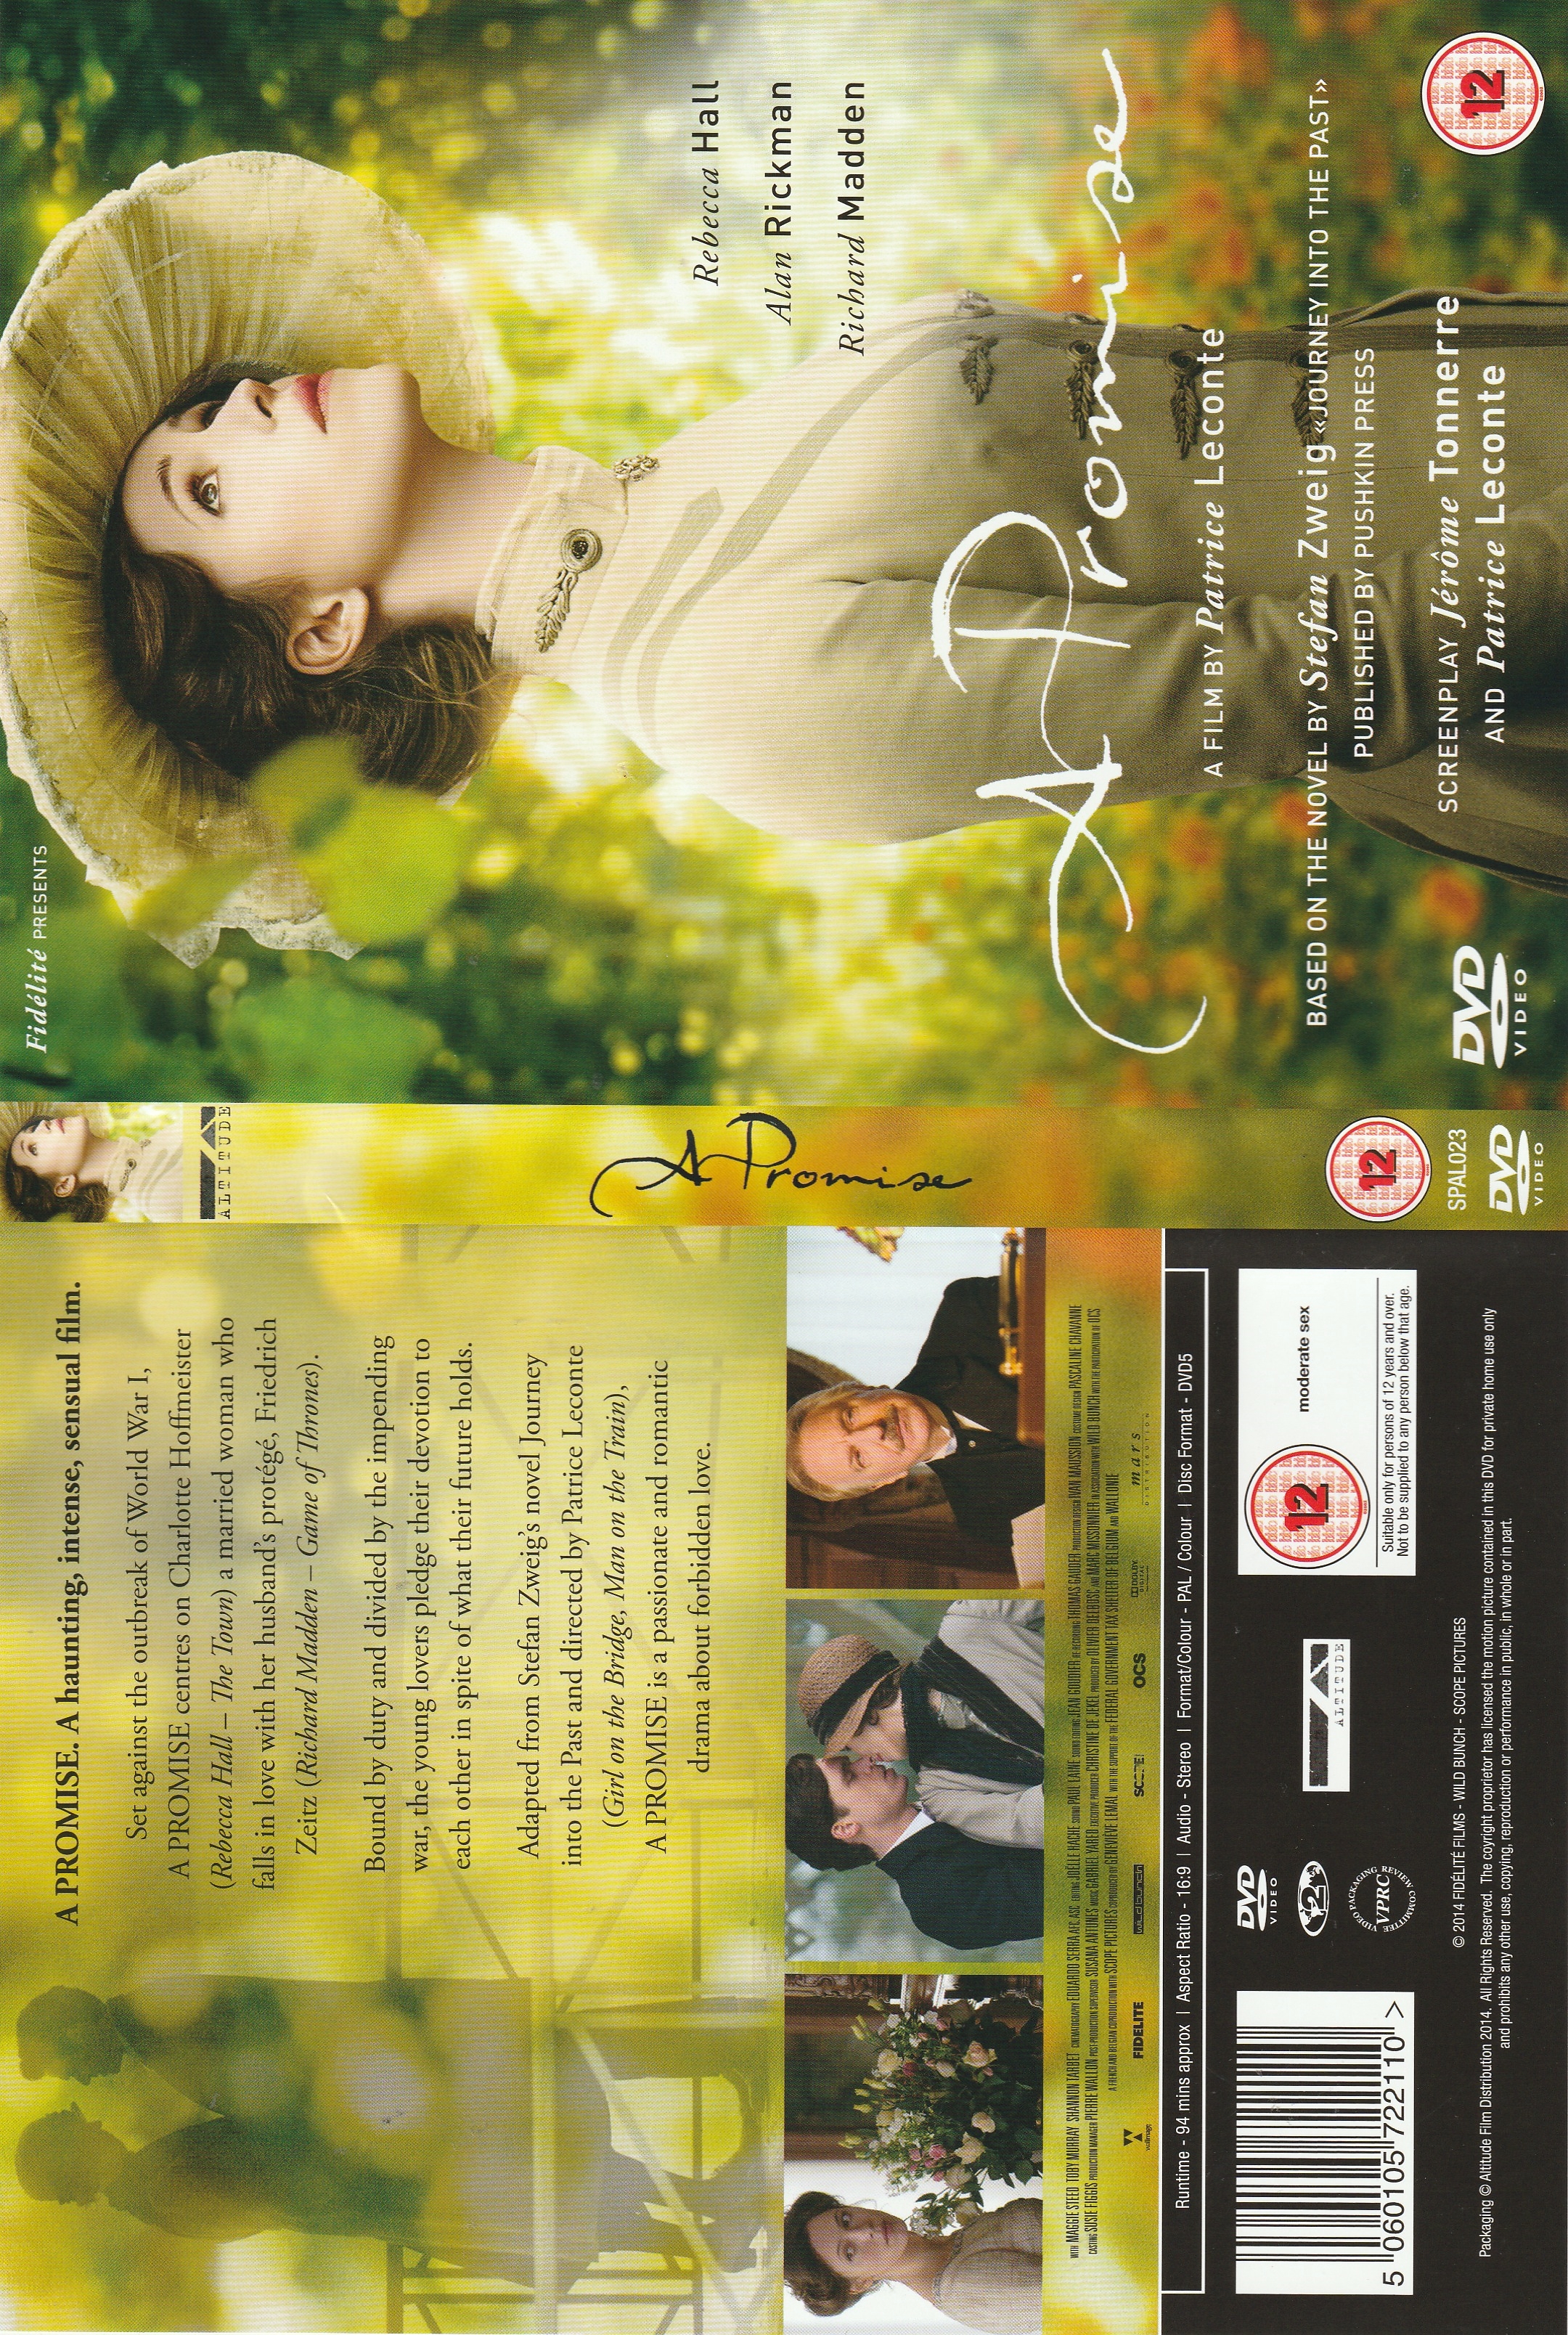 Jaquette DVD A promise ZONE 1